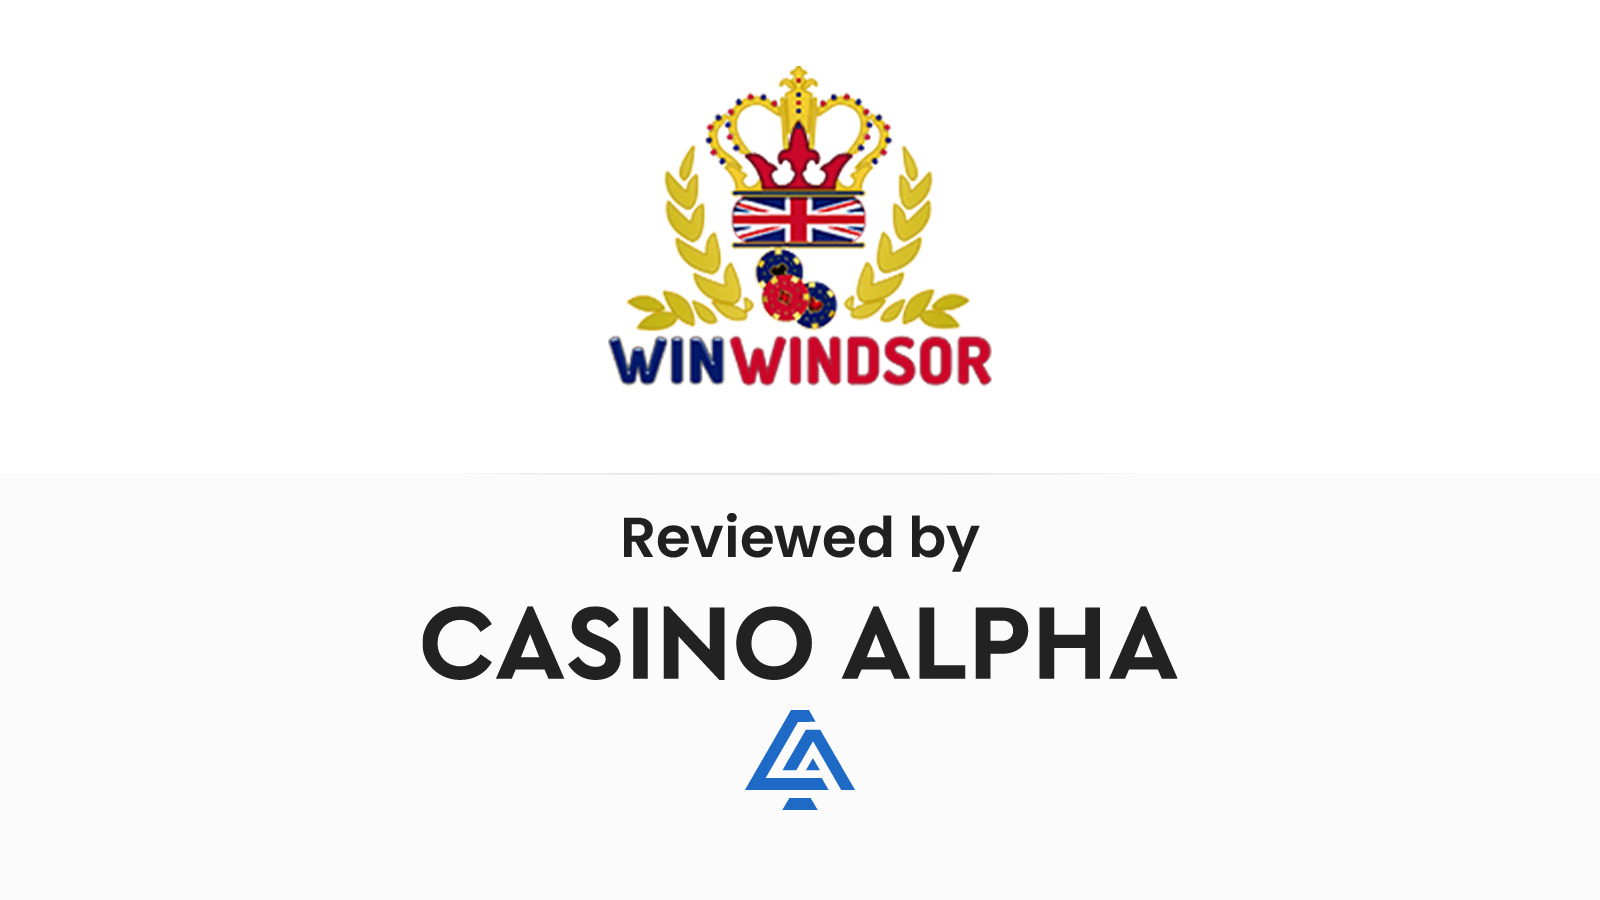 Win Windsor Review & Promo codes Play with 1000 up to 2000 NZD